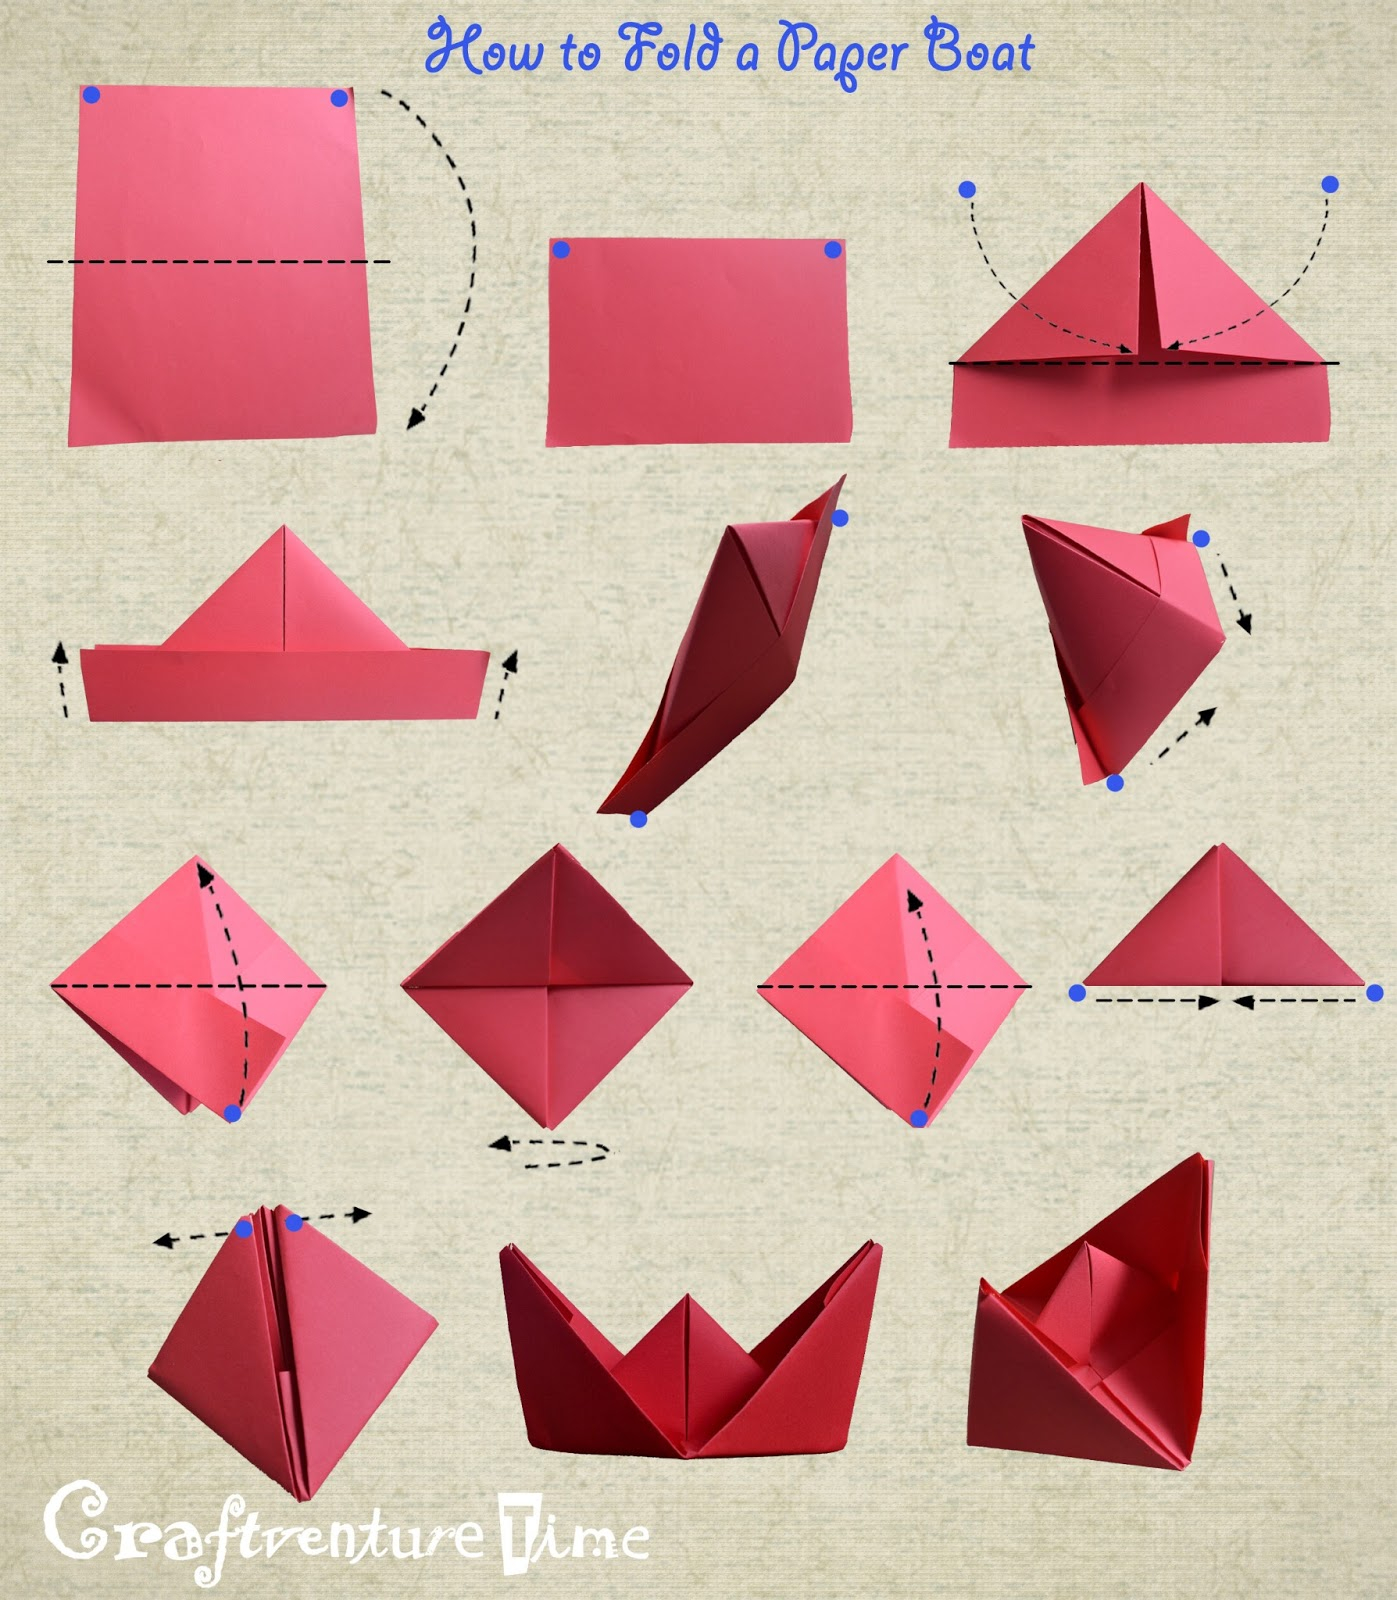 How To Make A Origami Sailboat How To Make A Motor Boat From Paper